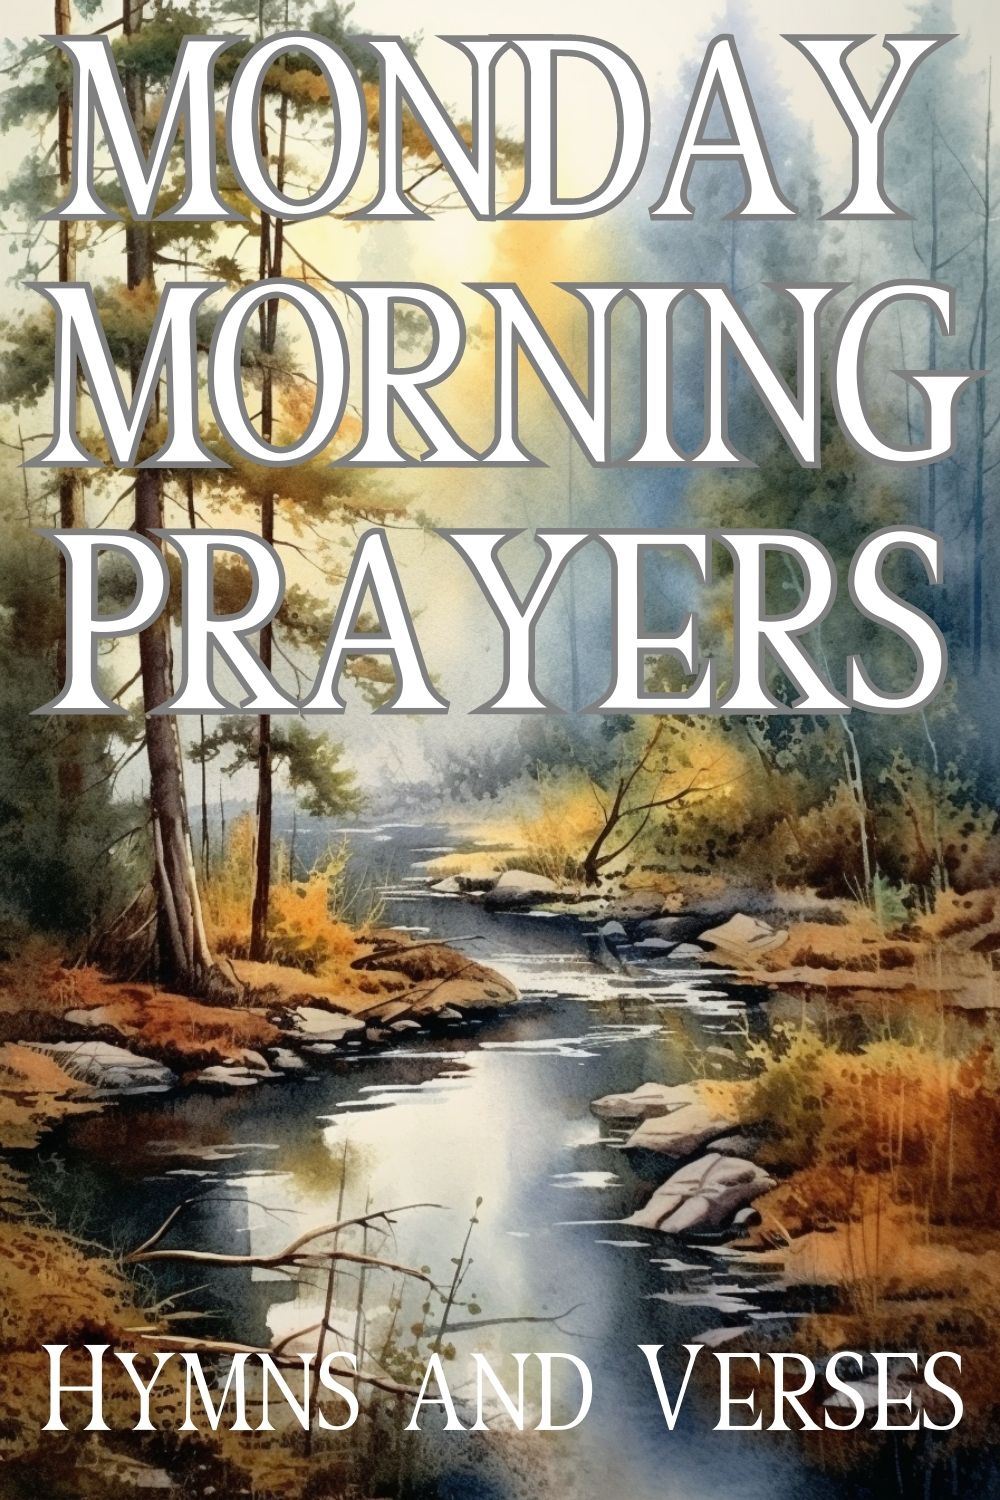 Pinterest pin about Monday morning prayers with a serene background in a forest with a stream